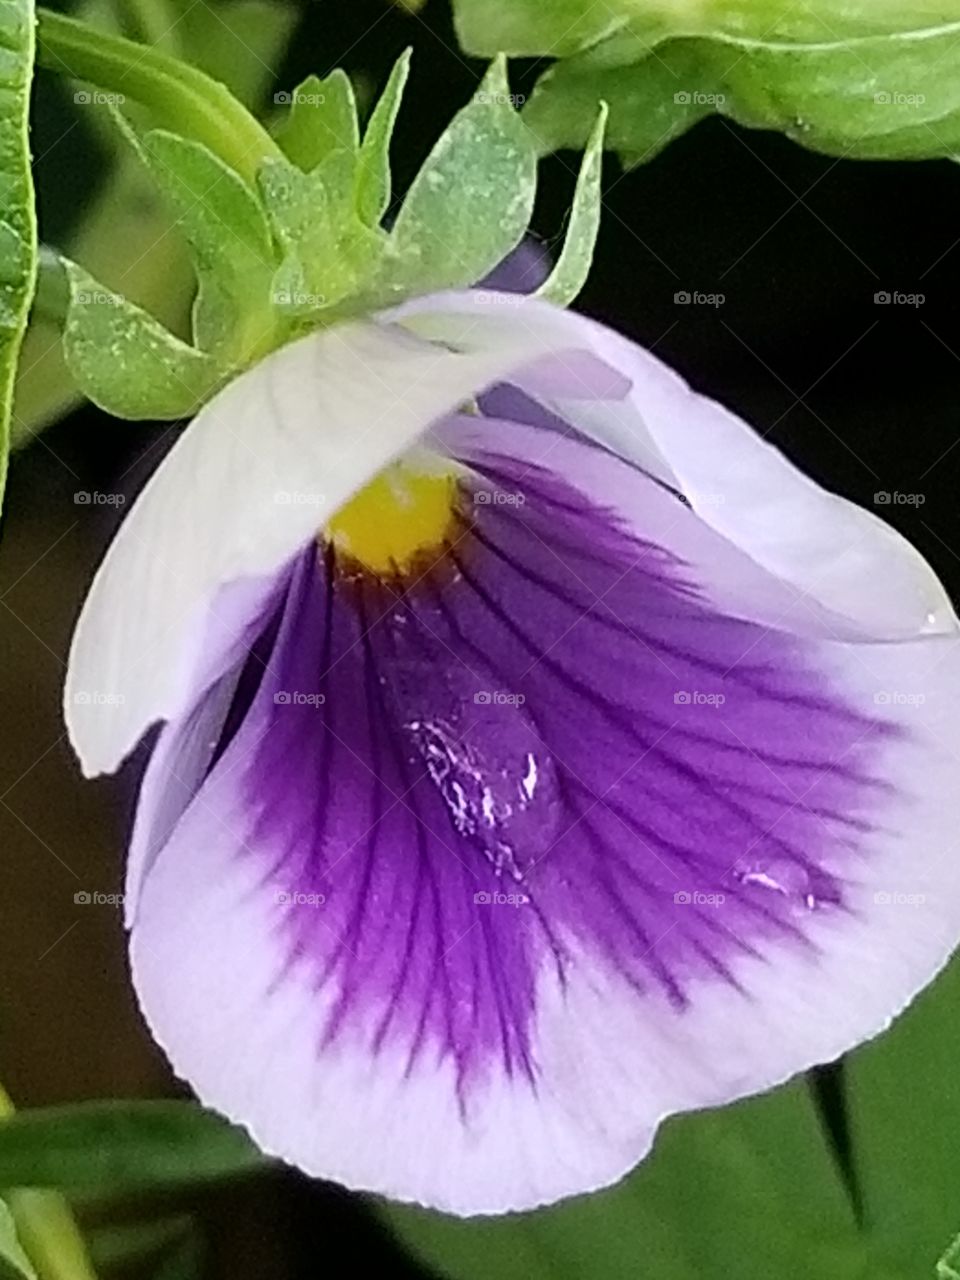 beautiful nature all around us let's us all go outside to find it. here we see a purple flower with tear coming down. let us all know it is ok to cry to help release the pain in our lives.